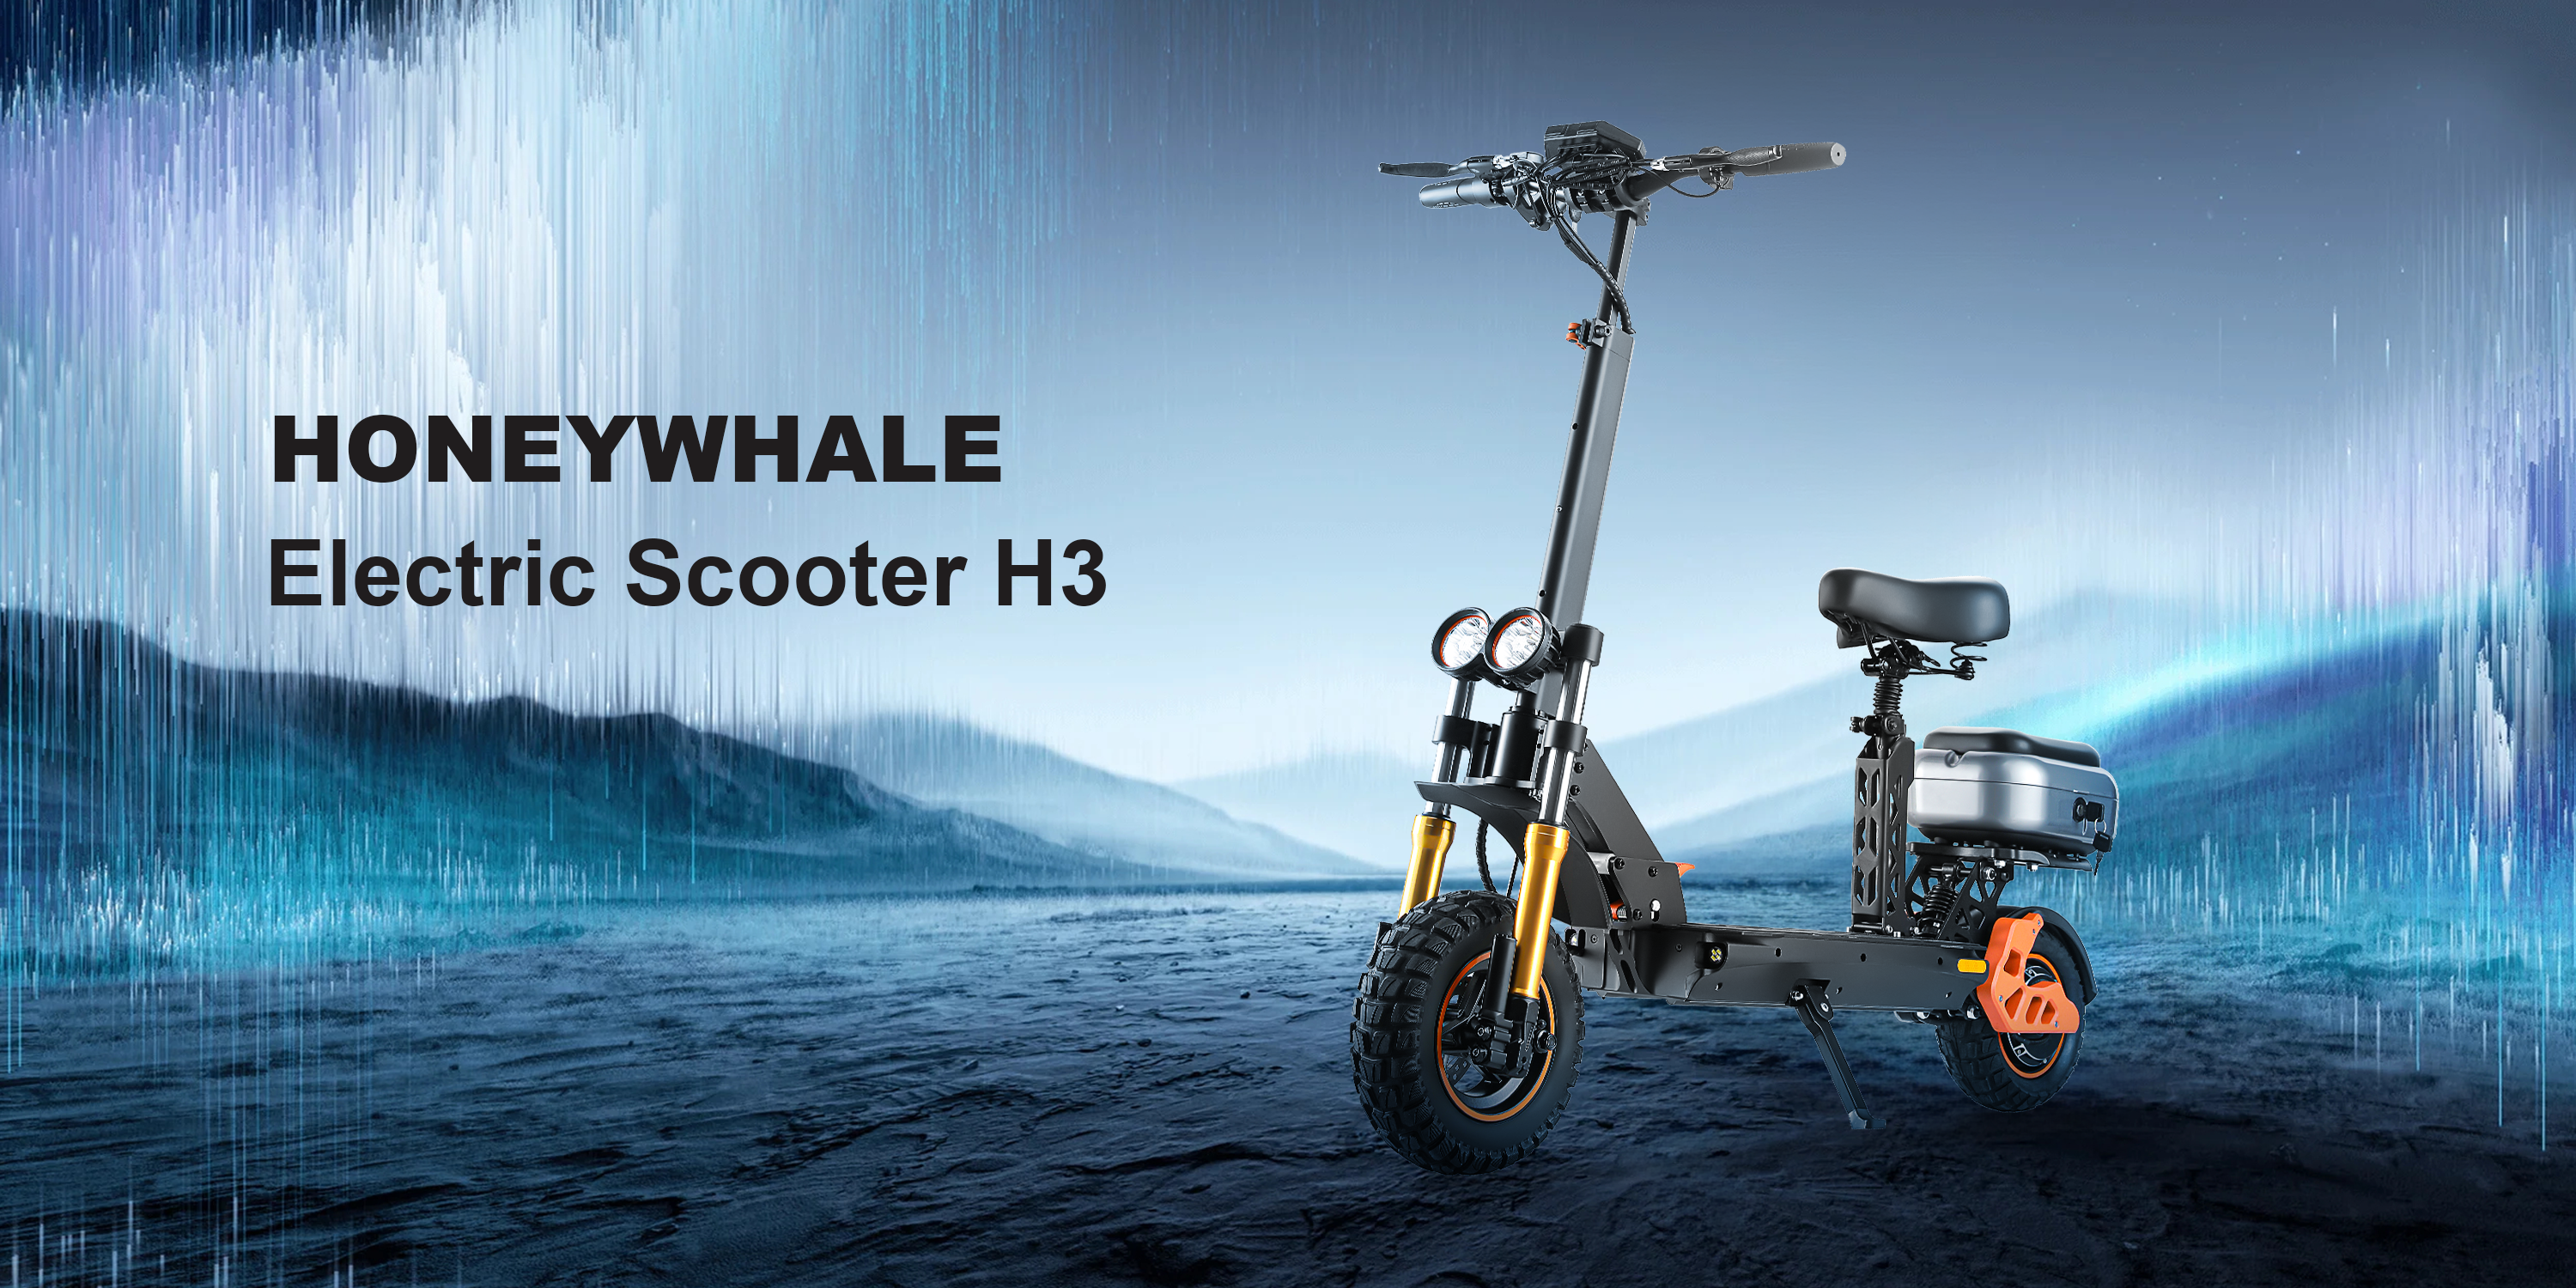 H3 Scooter honey whale